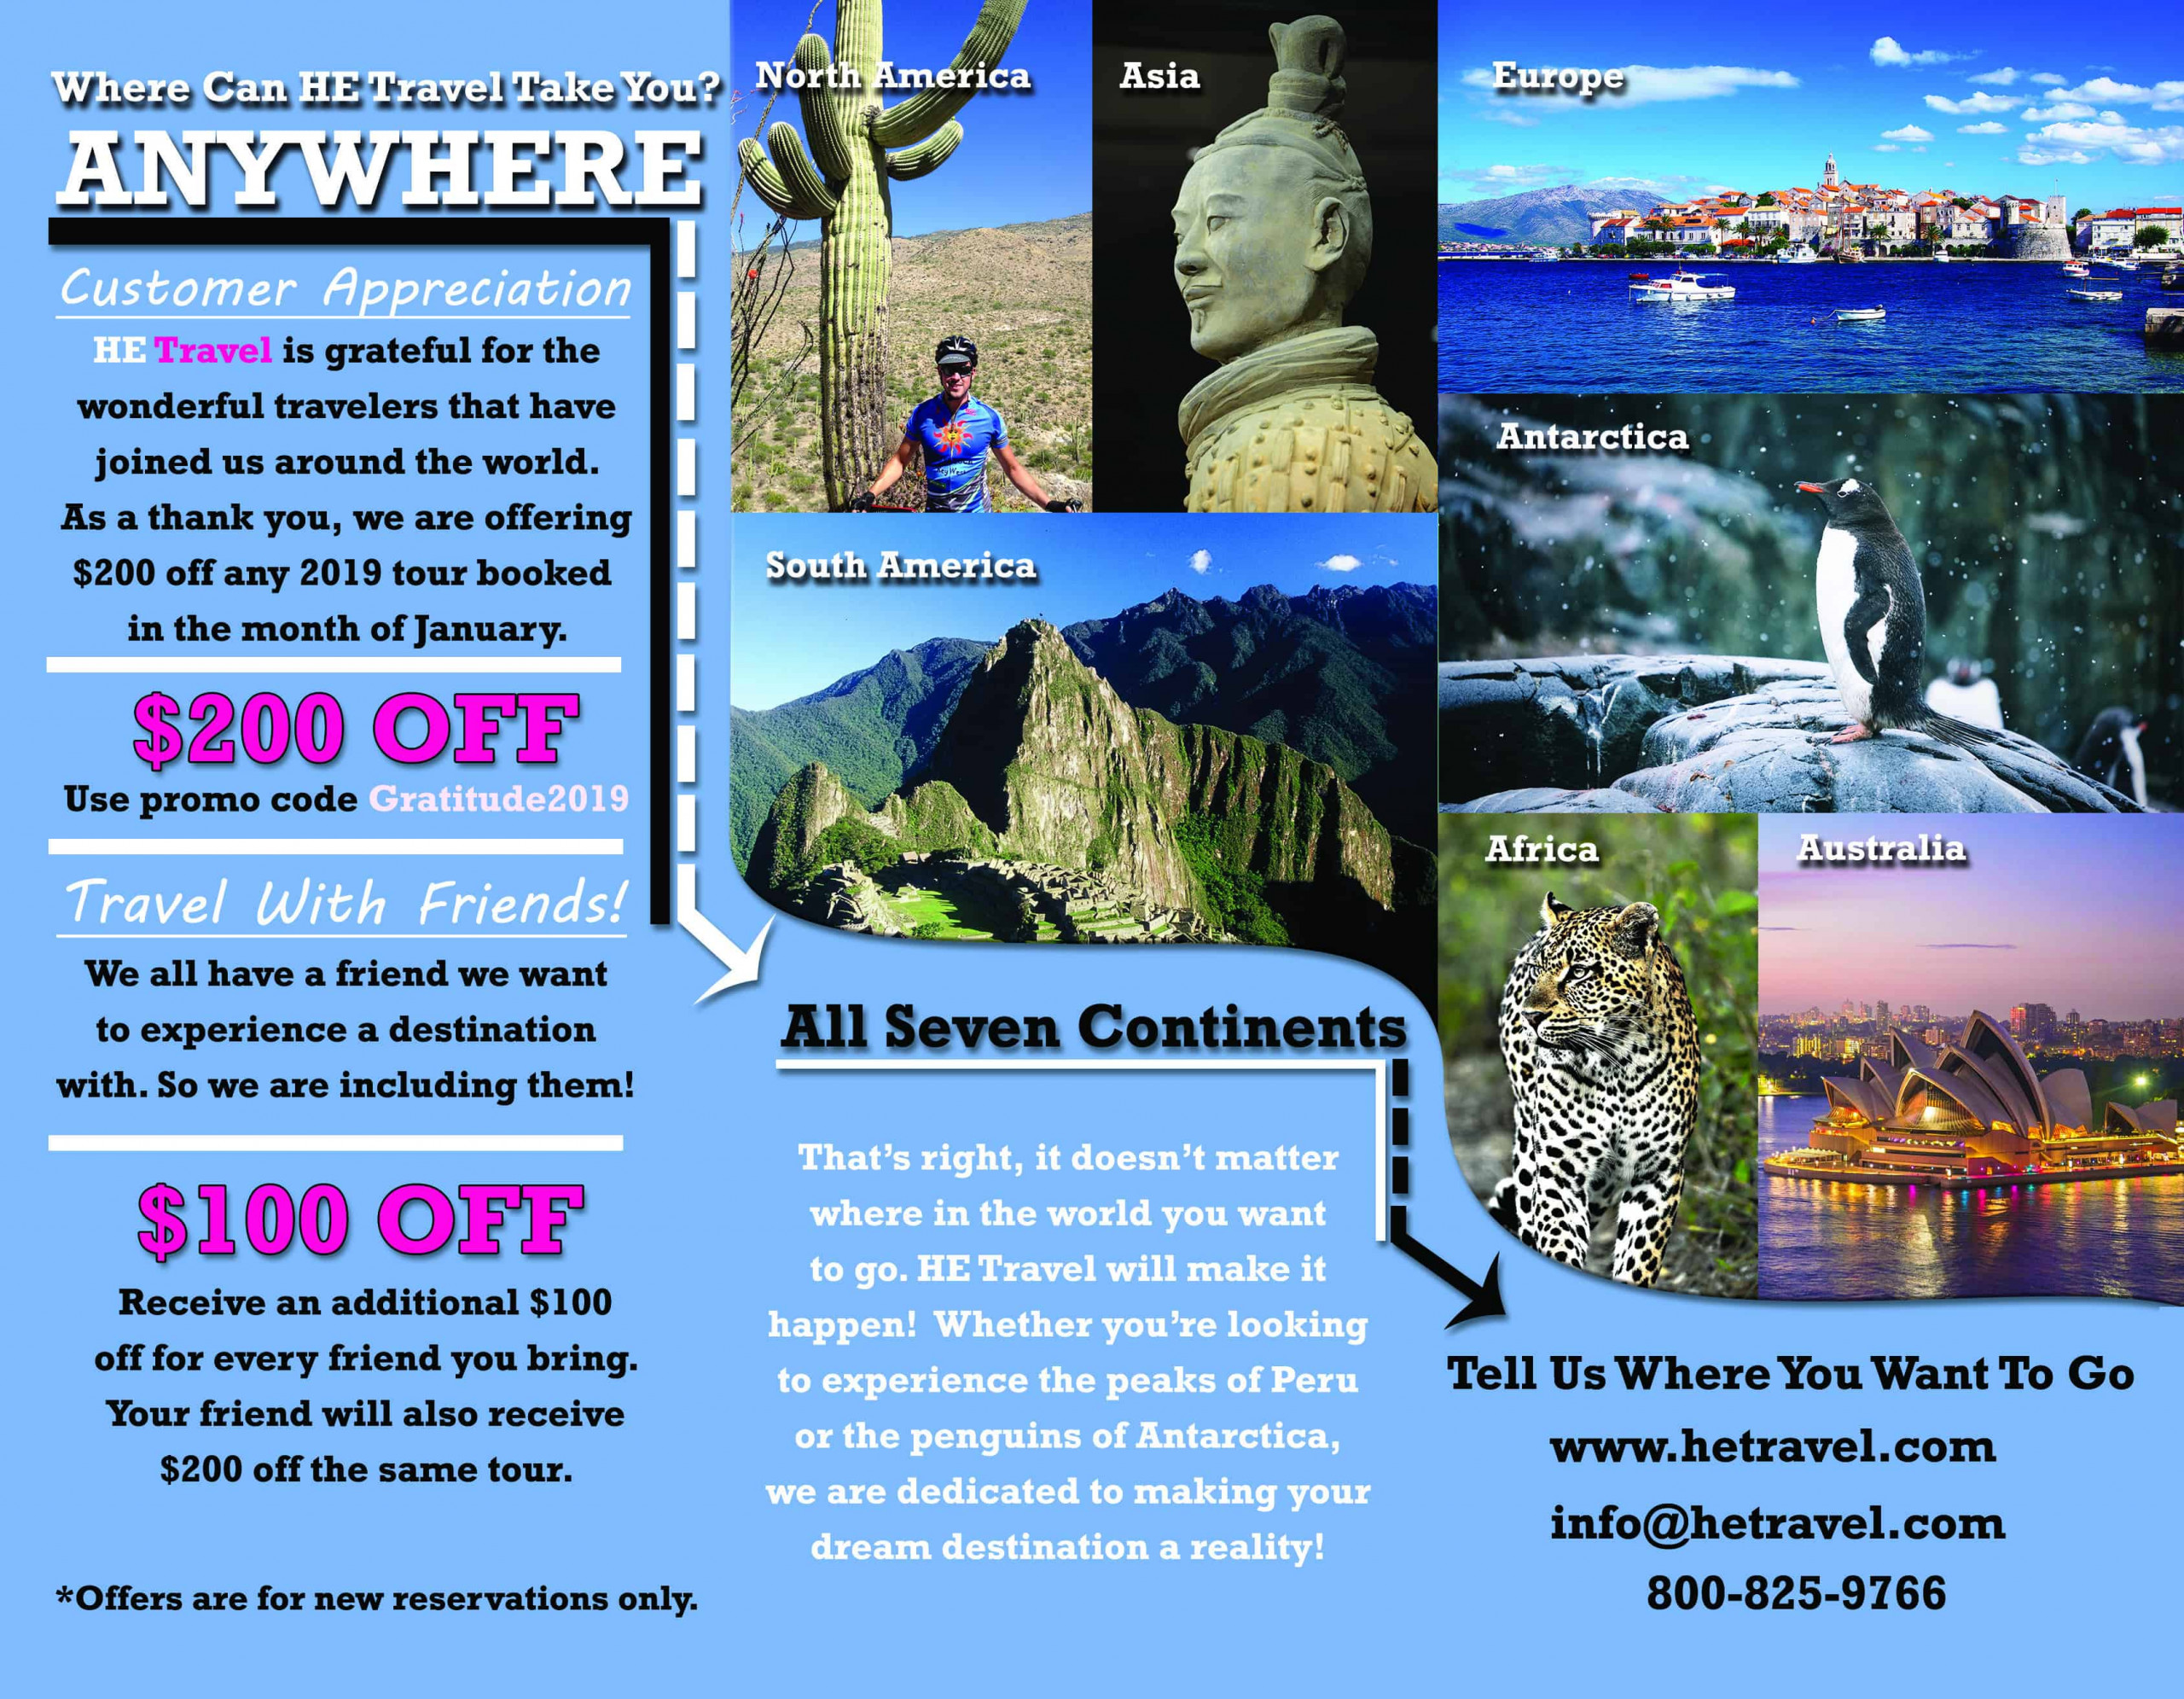 HE Travel's Customer Appreciation Trifold Promoting 300 off for worldwide gay tours and gay travel on all seven continents